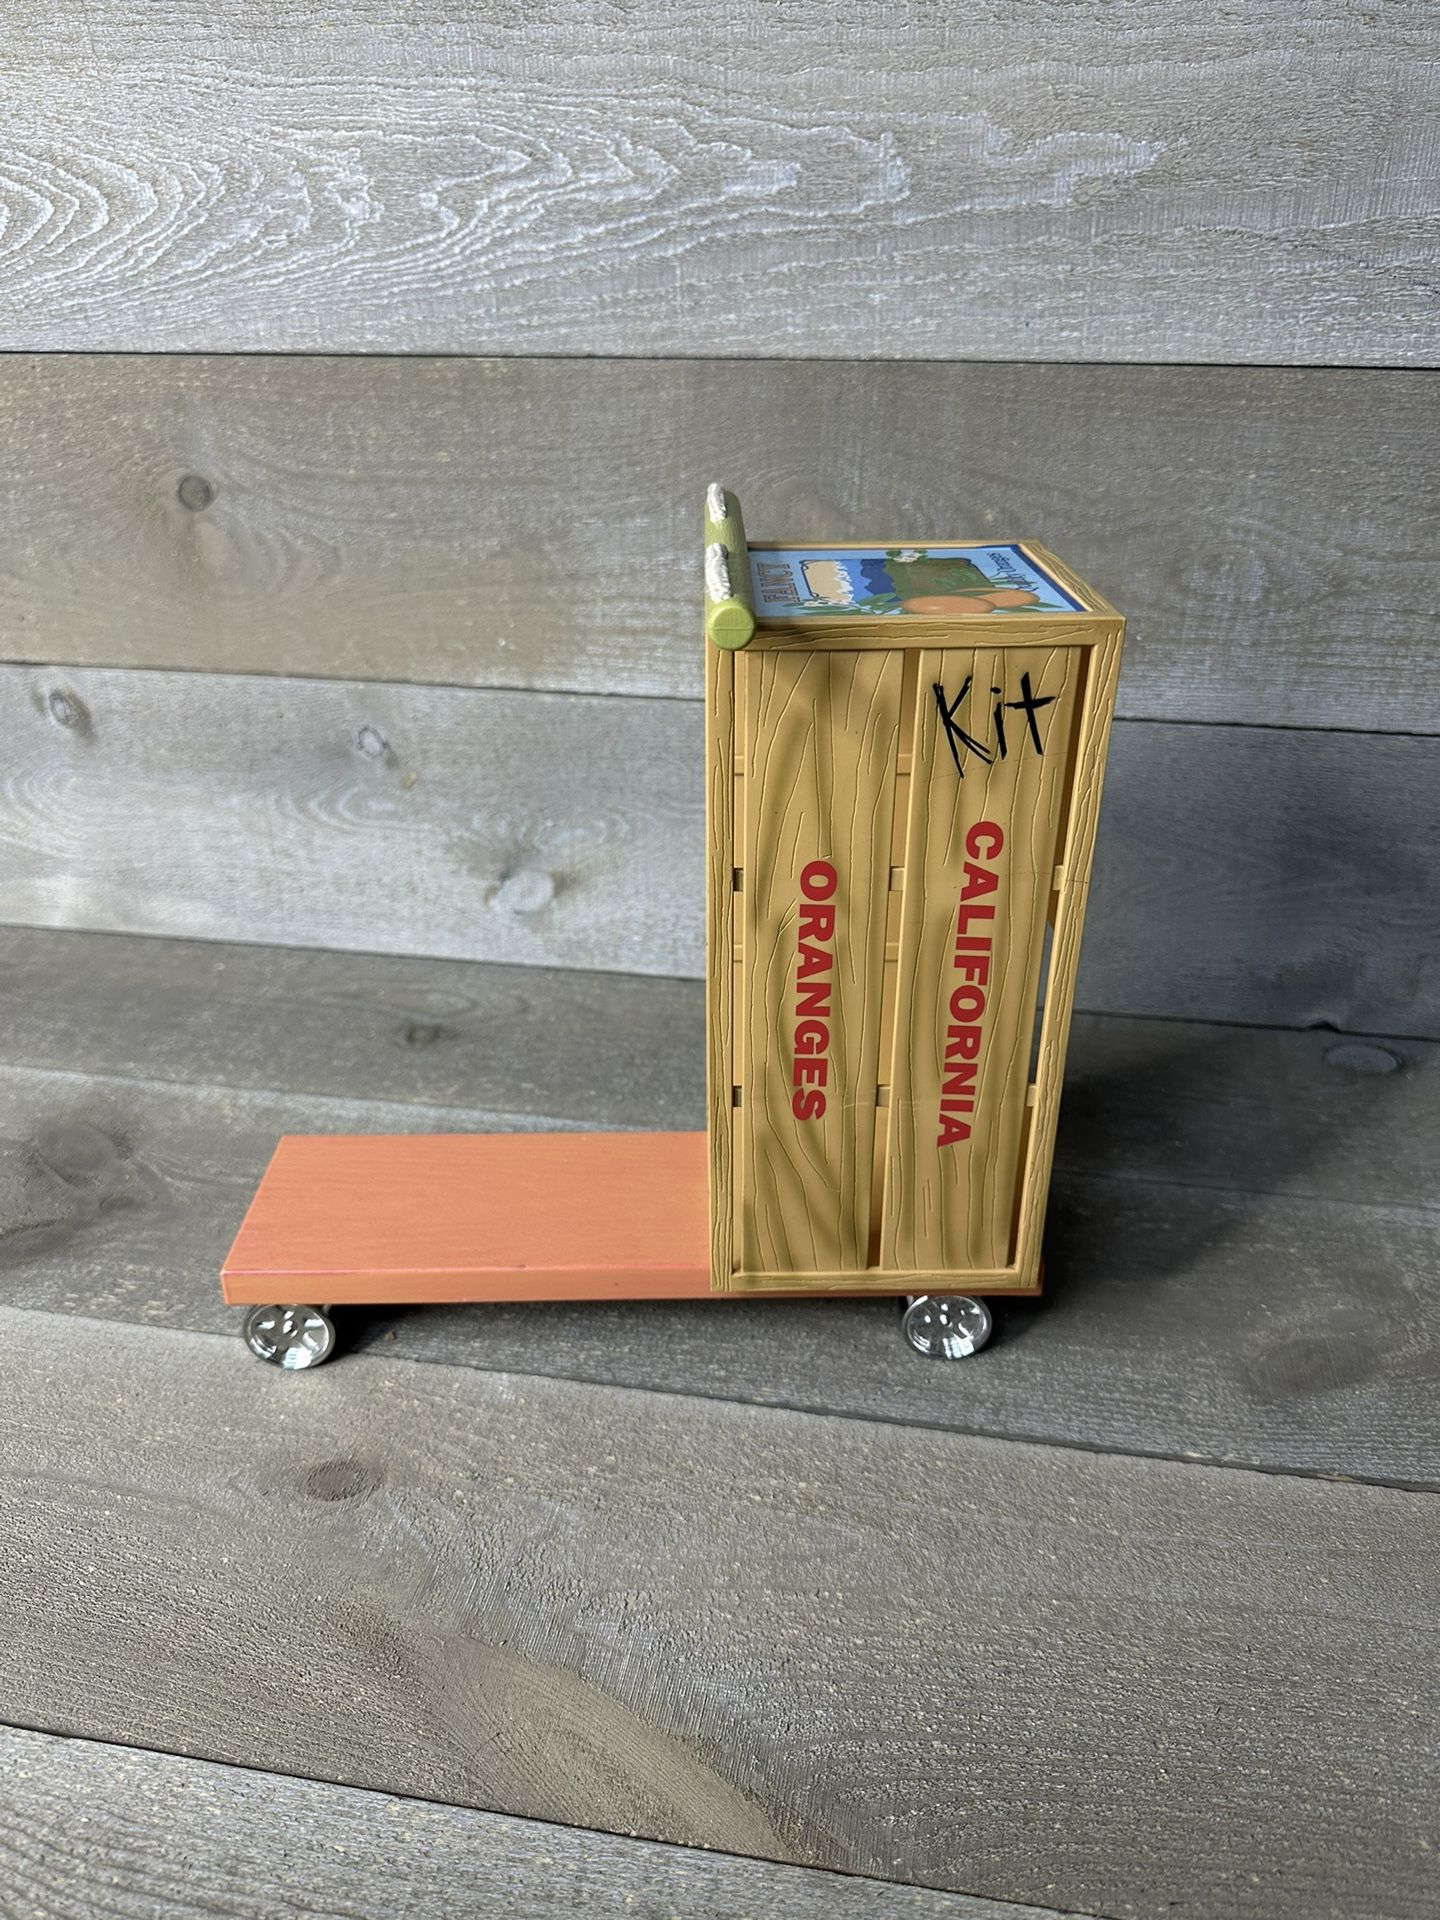 American Girl Kit Kittredge Doll Scooter Great Depression Crate Style 2178